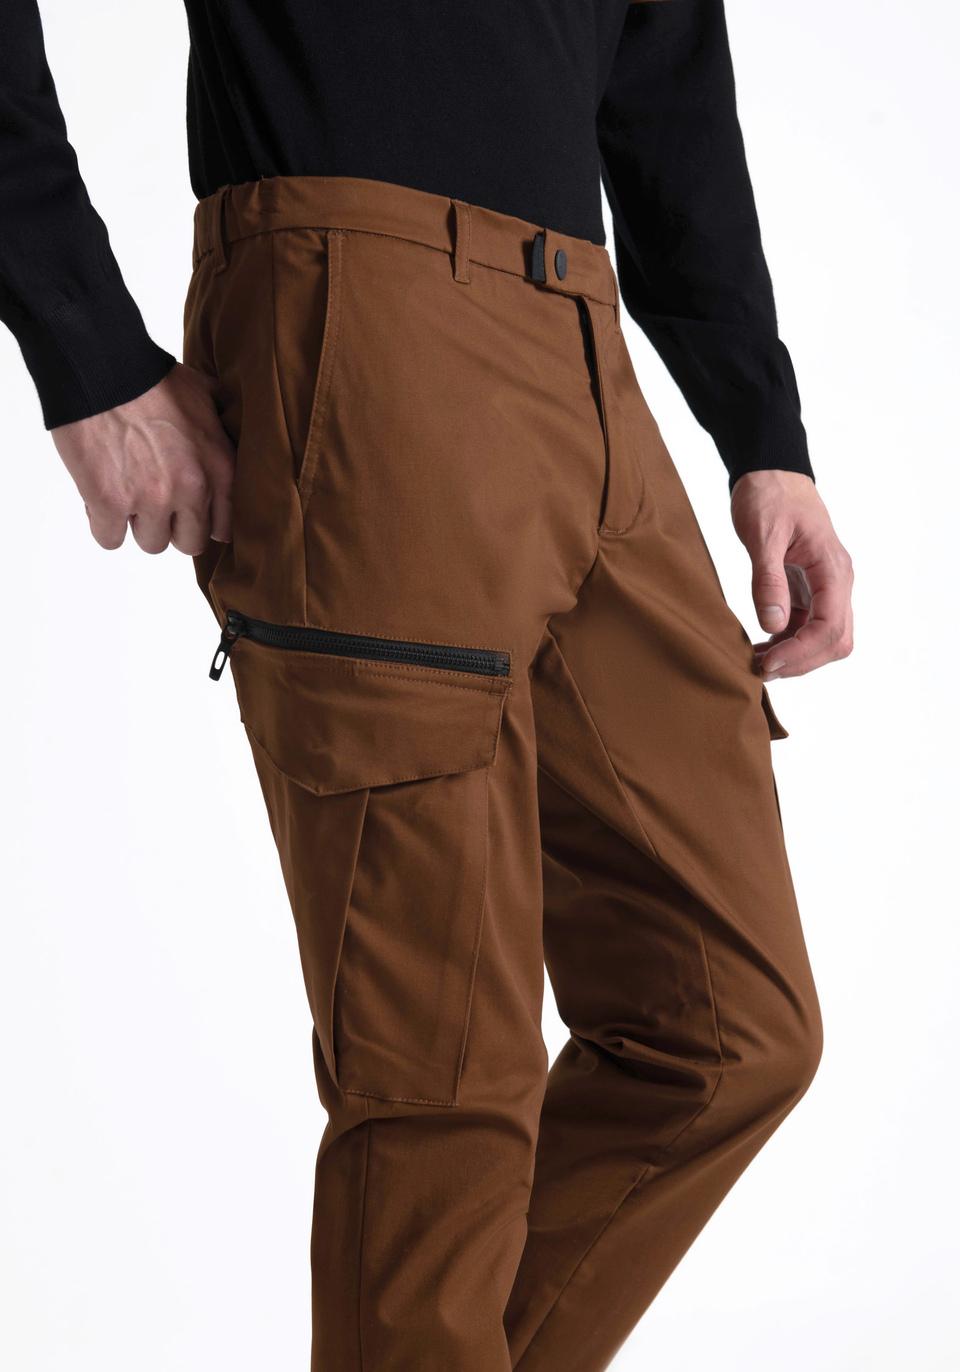 SKINNY FIT CARGO TROUSERS IN STRETCH FABRIC - Antony Morato Online Shop